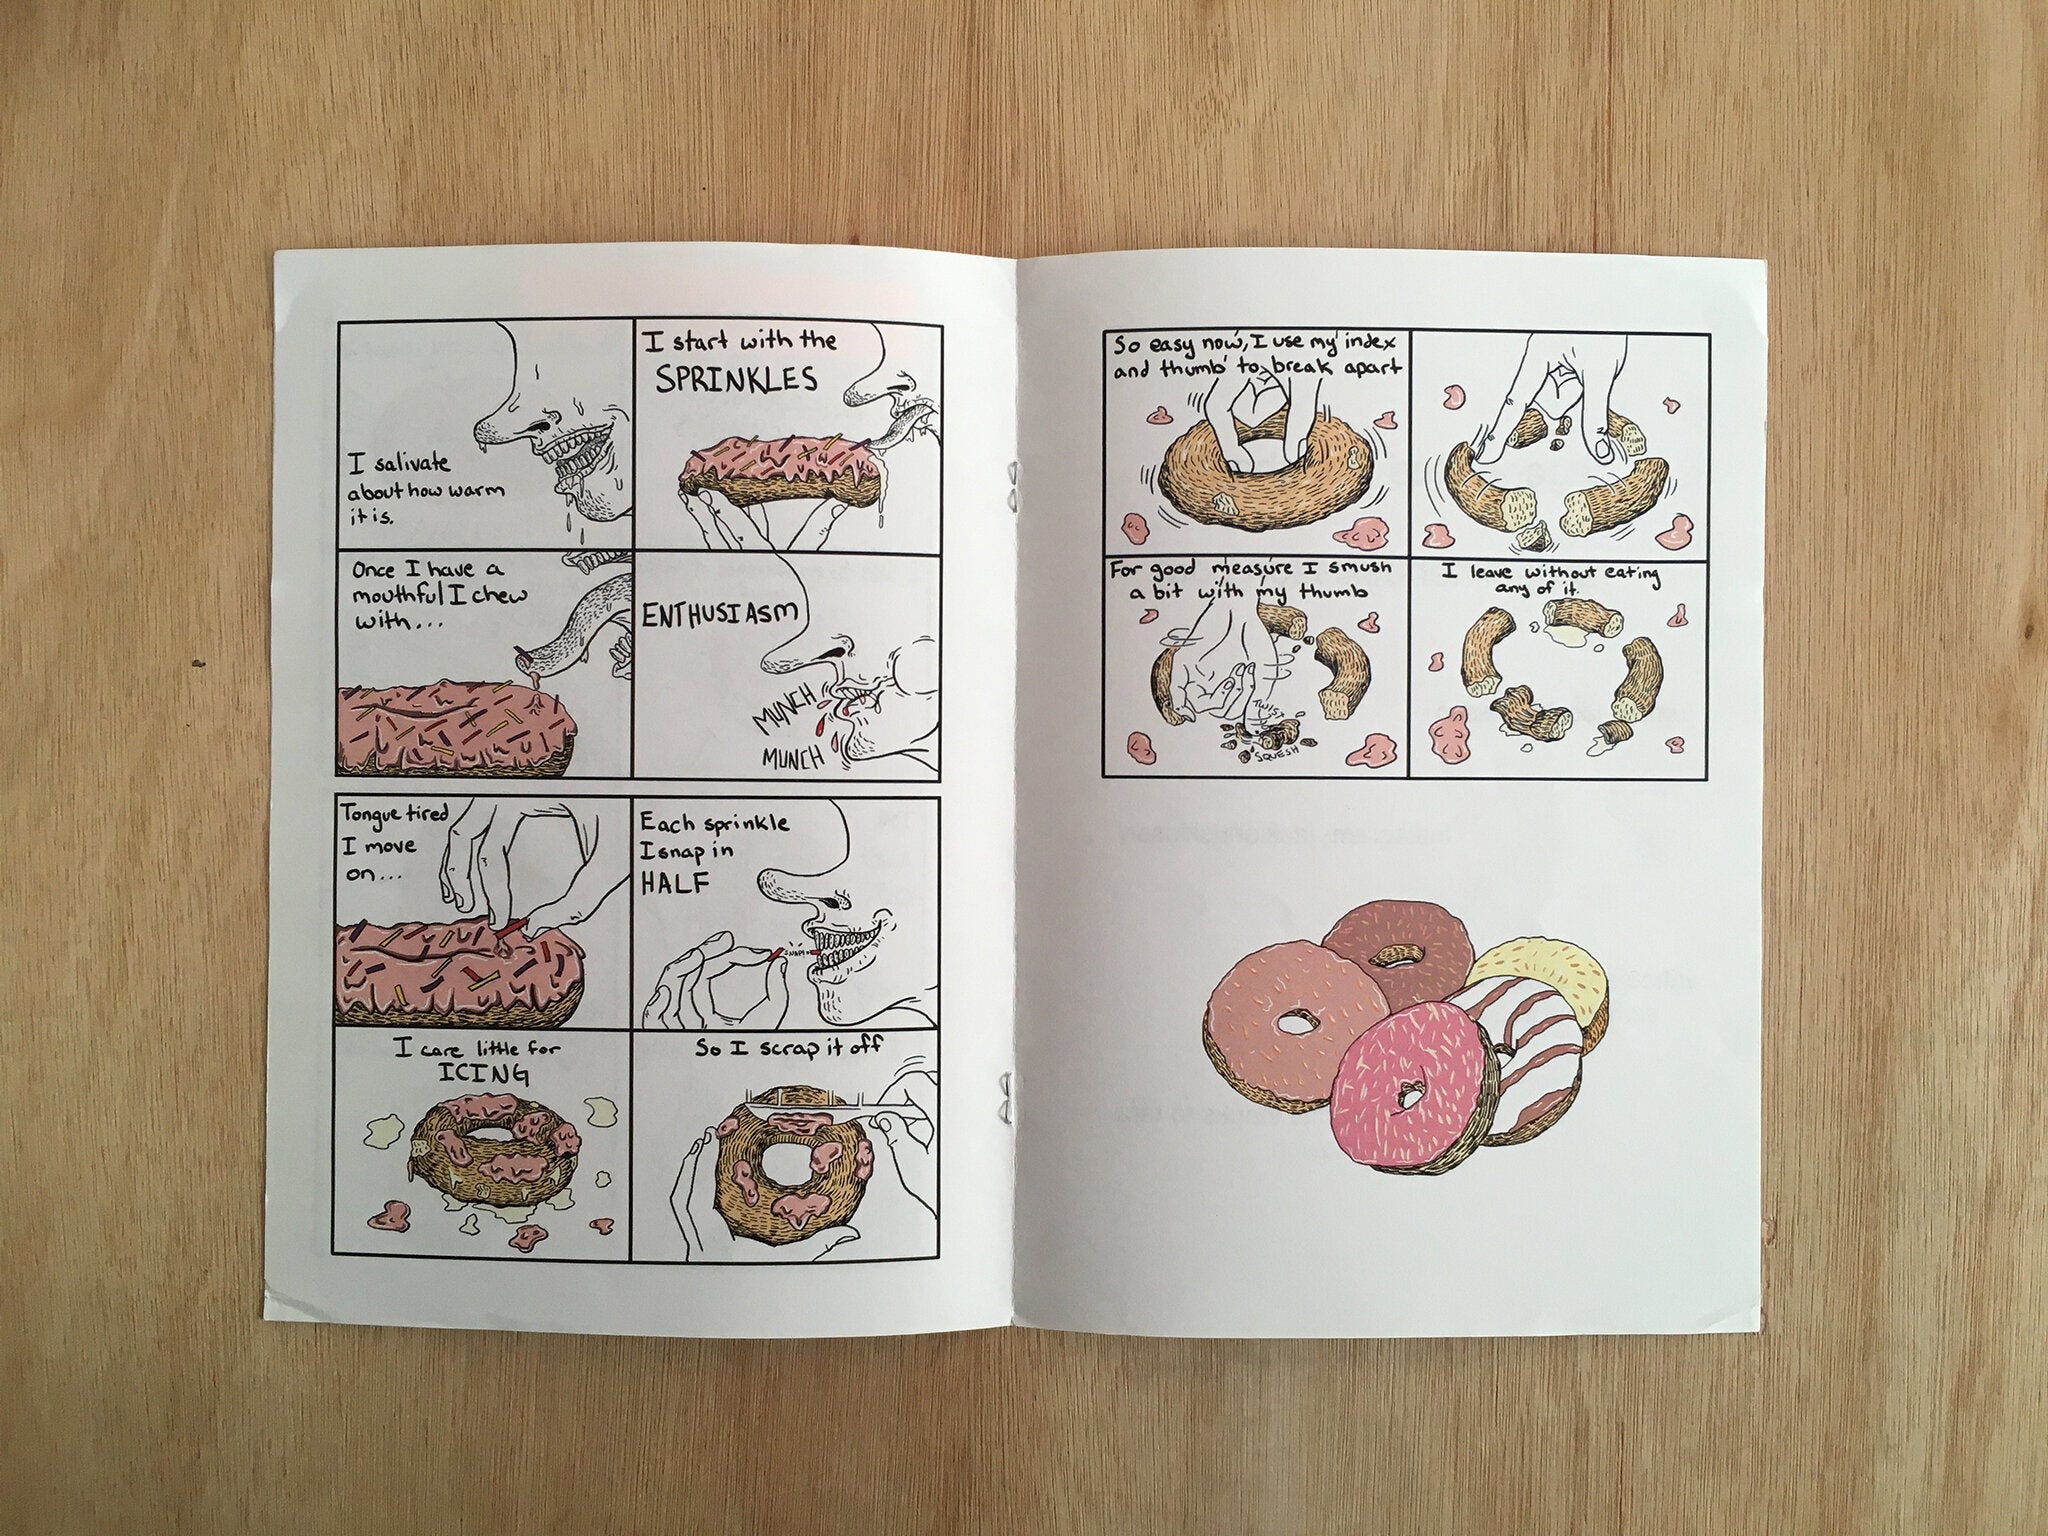 AGGRAVATED DOUGHNUTS by Jacqueline Huskisson